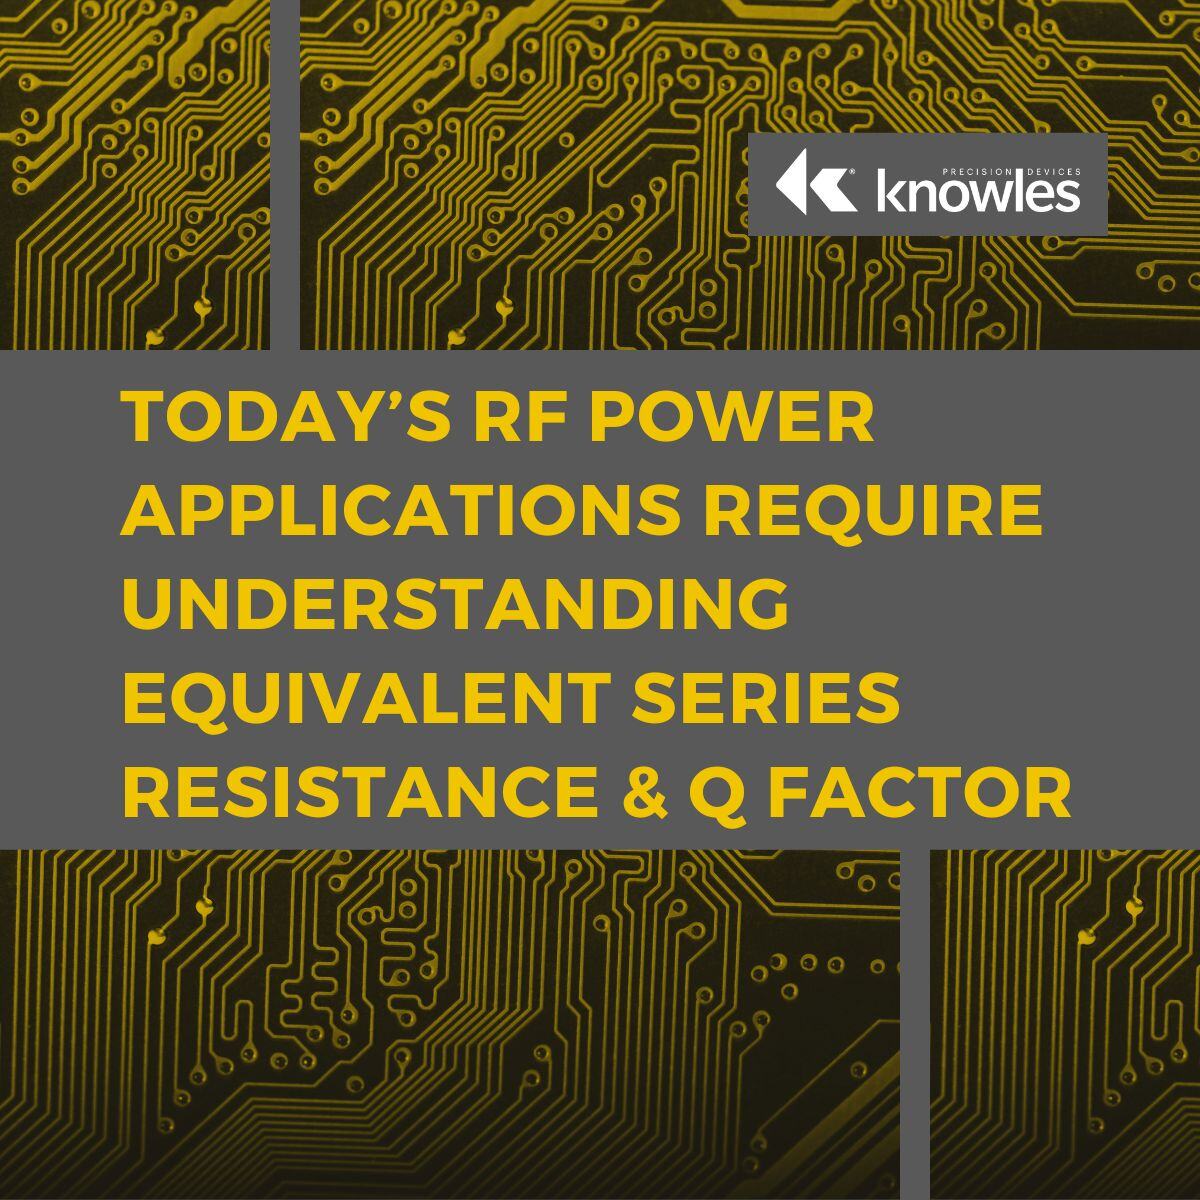 Today’s RF Power Applications Require Understanding Equivalent Series Resistance & Q Factor